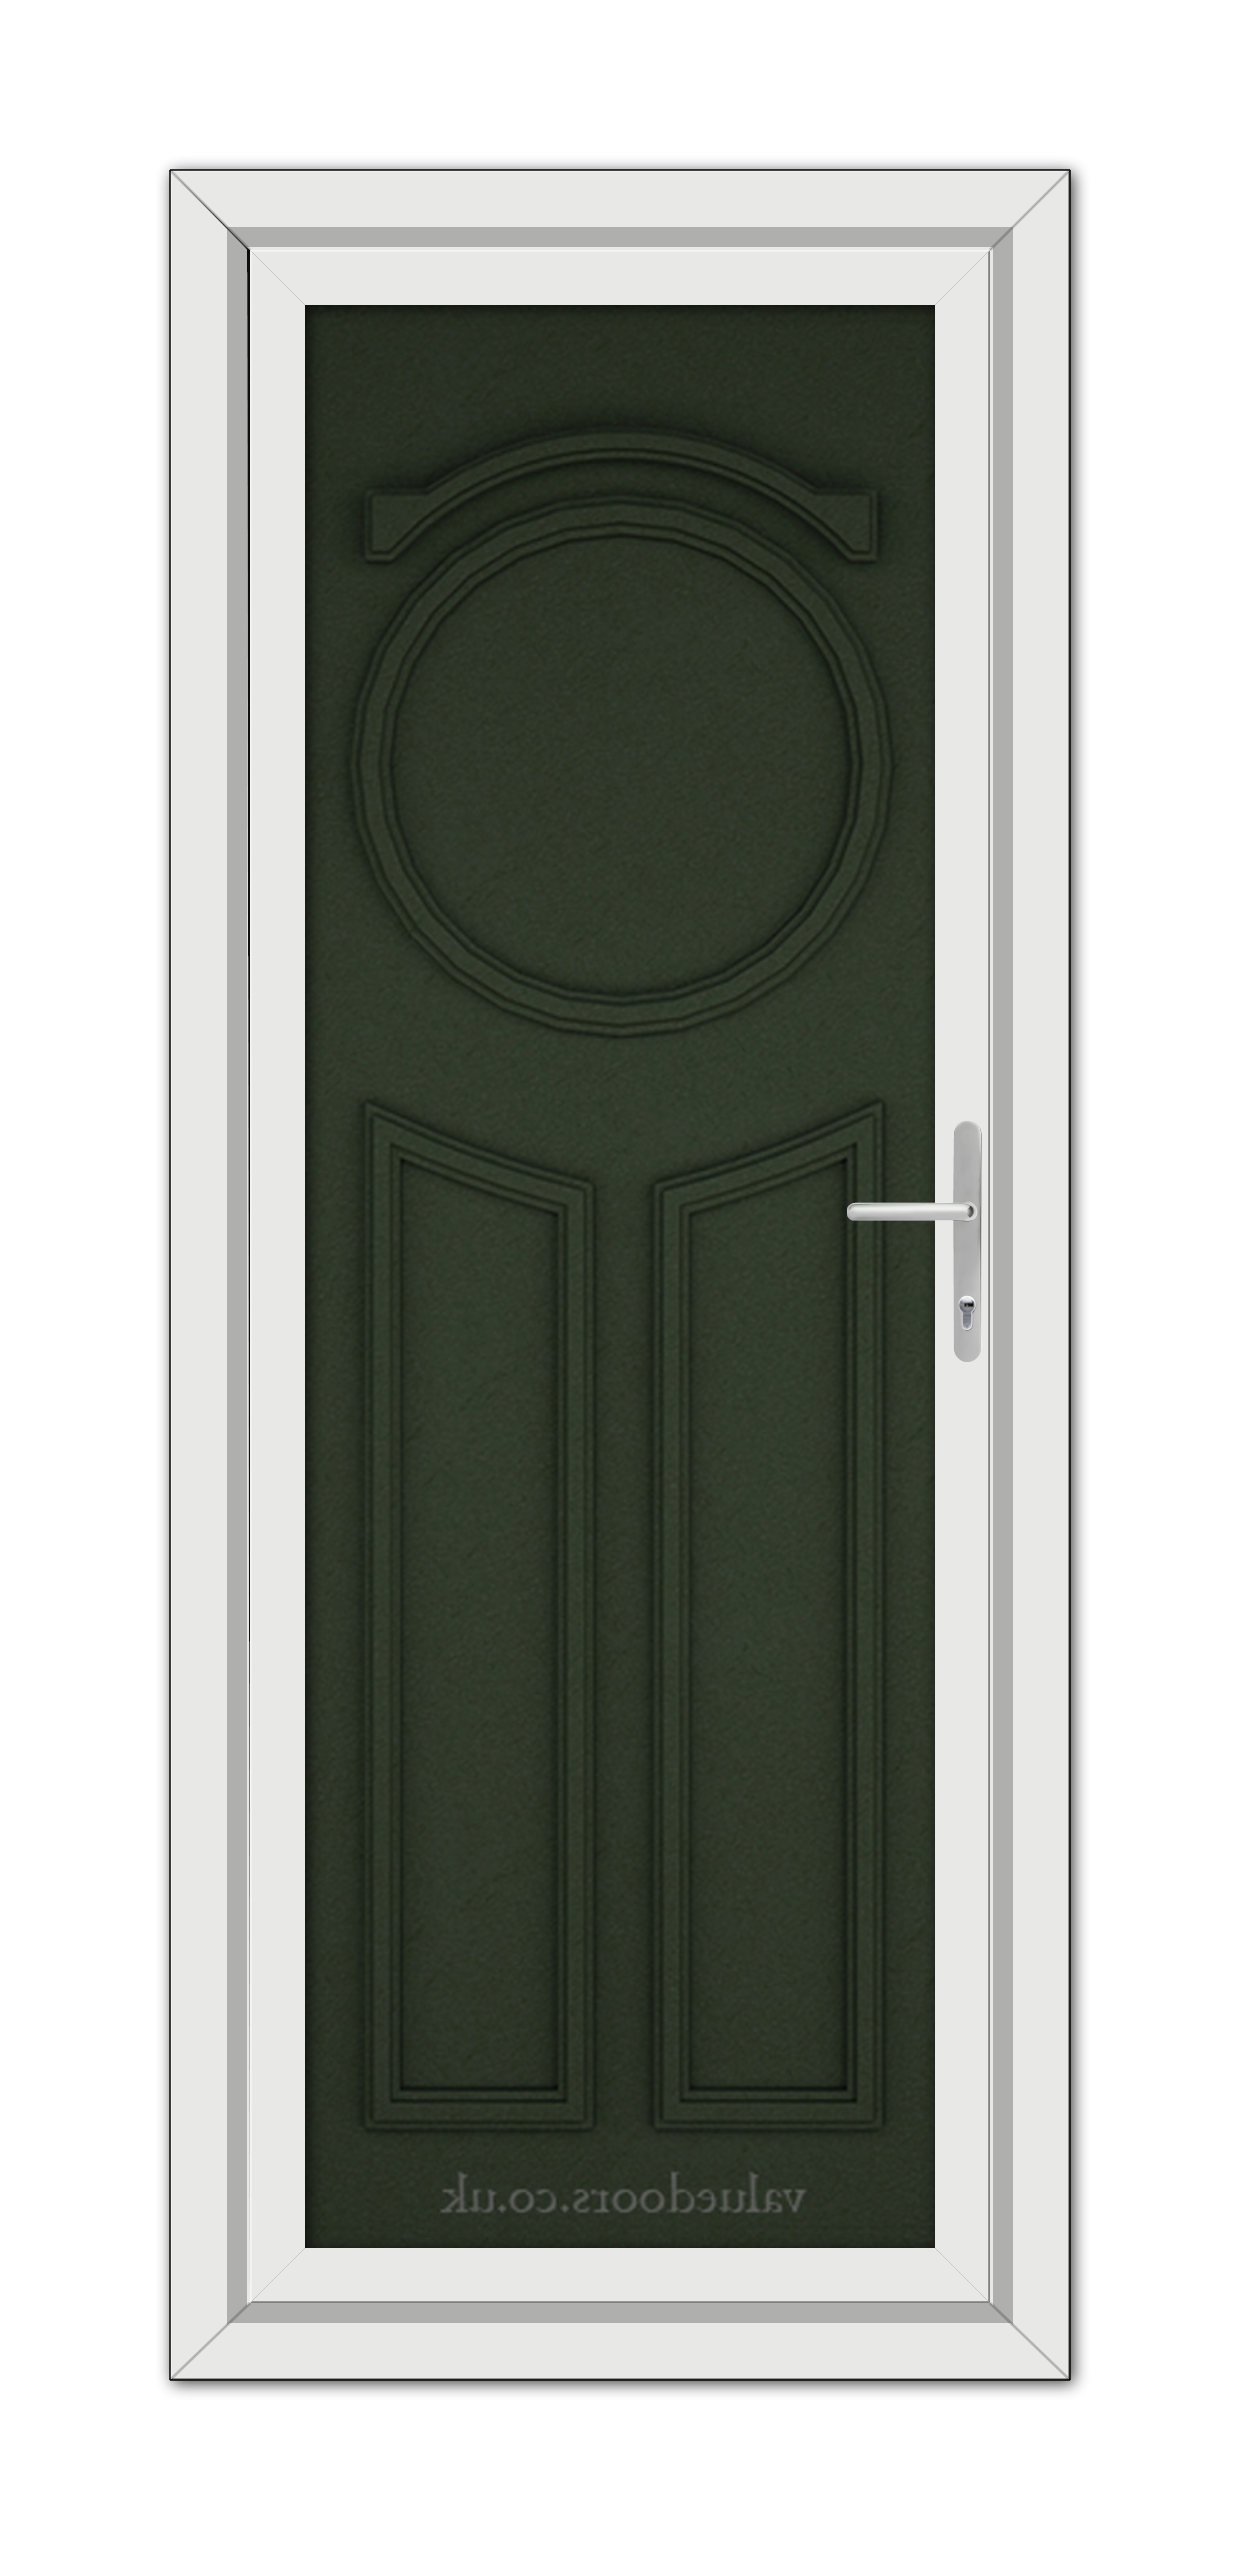 A vertical image of a Green Blenheim Solid uPVC Door with an oval window at the top, set within a white frame, featuring a modern handle on the right side.